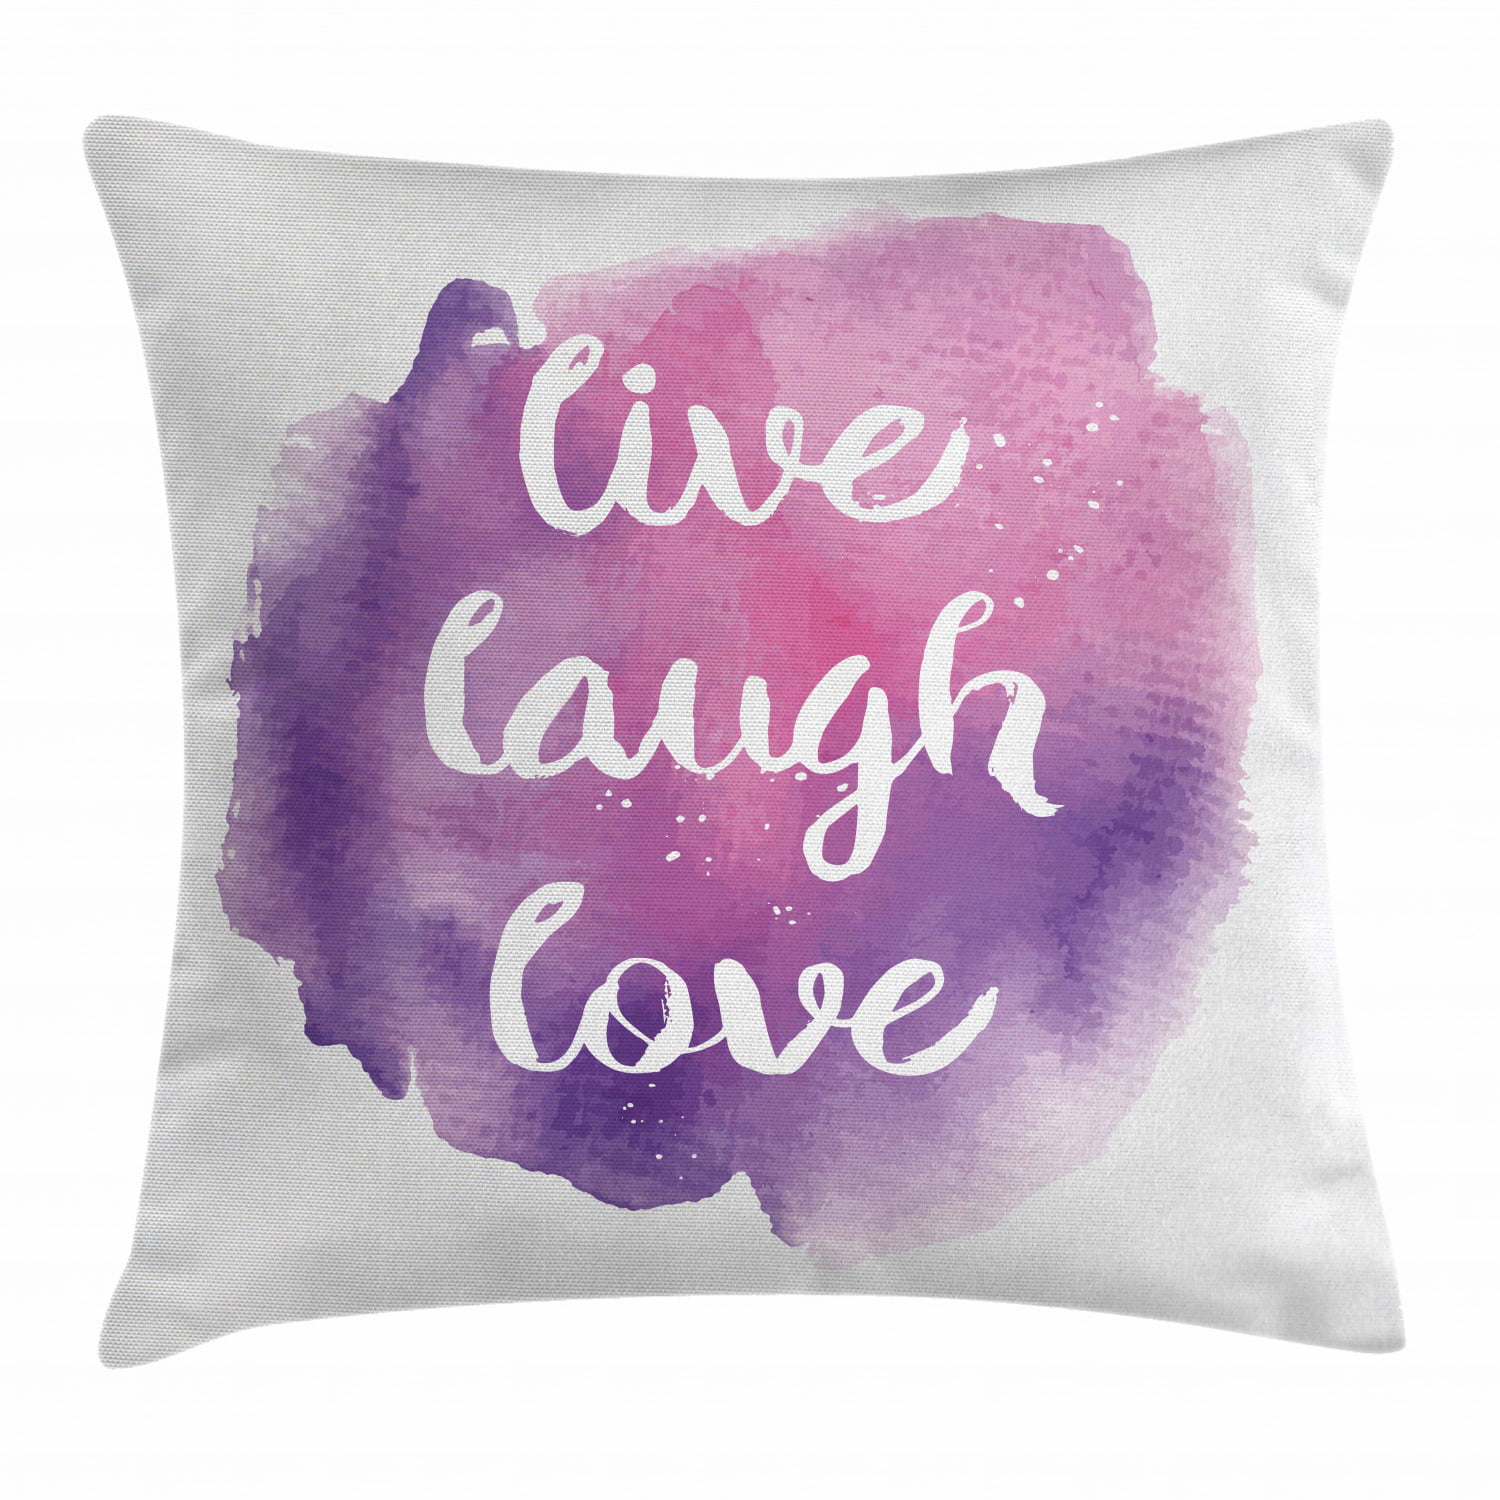 Live Laugh Love Decor Throw Pillow Cushion Cover, Wise Happy Life ...